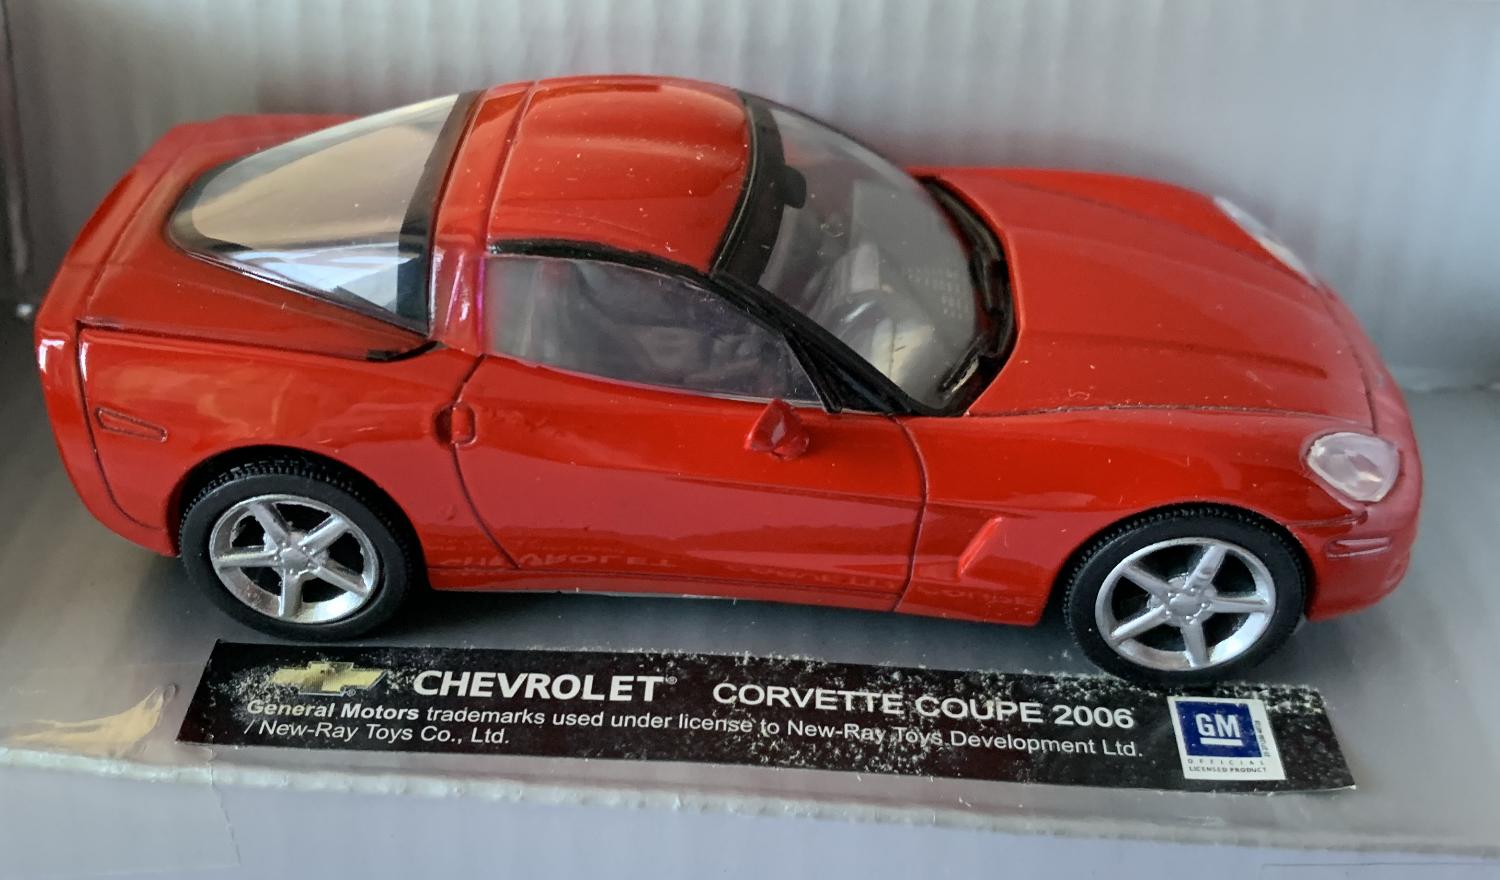 Chevrolet Corvette Coupe 2006 in red 1:43 scale diecast car model from NewRay, 19193A